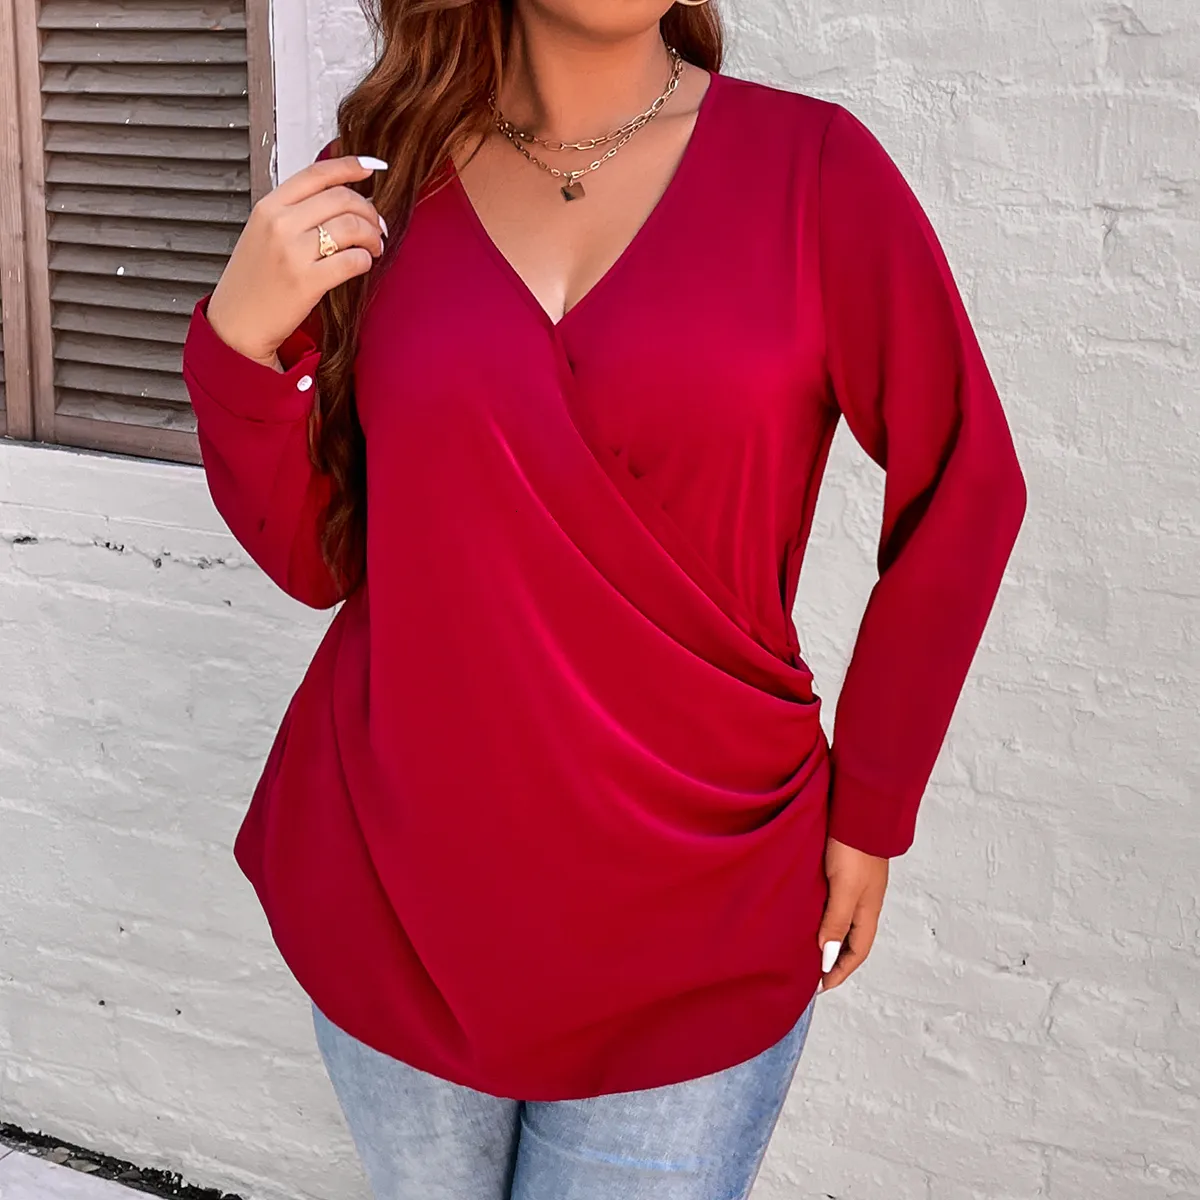 Women's Plus Size TShirt Women Clothing Autumn Winter Loose Fit Long Sleeve T Shirt Solid Black Large Big Tops V Neck Casual Blouse 4XL 230705